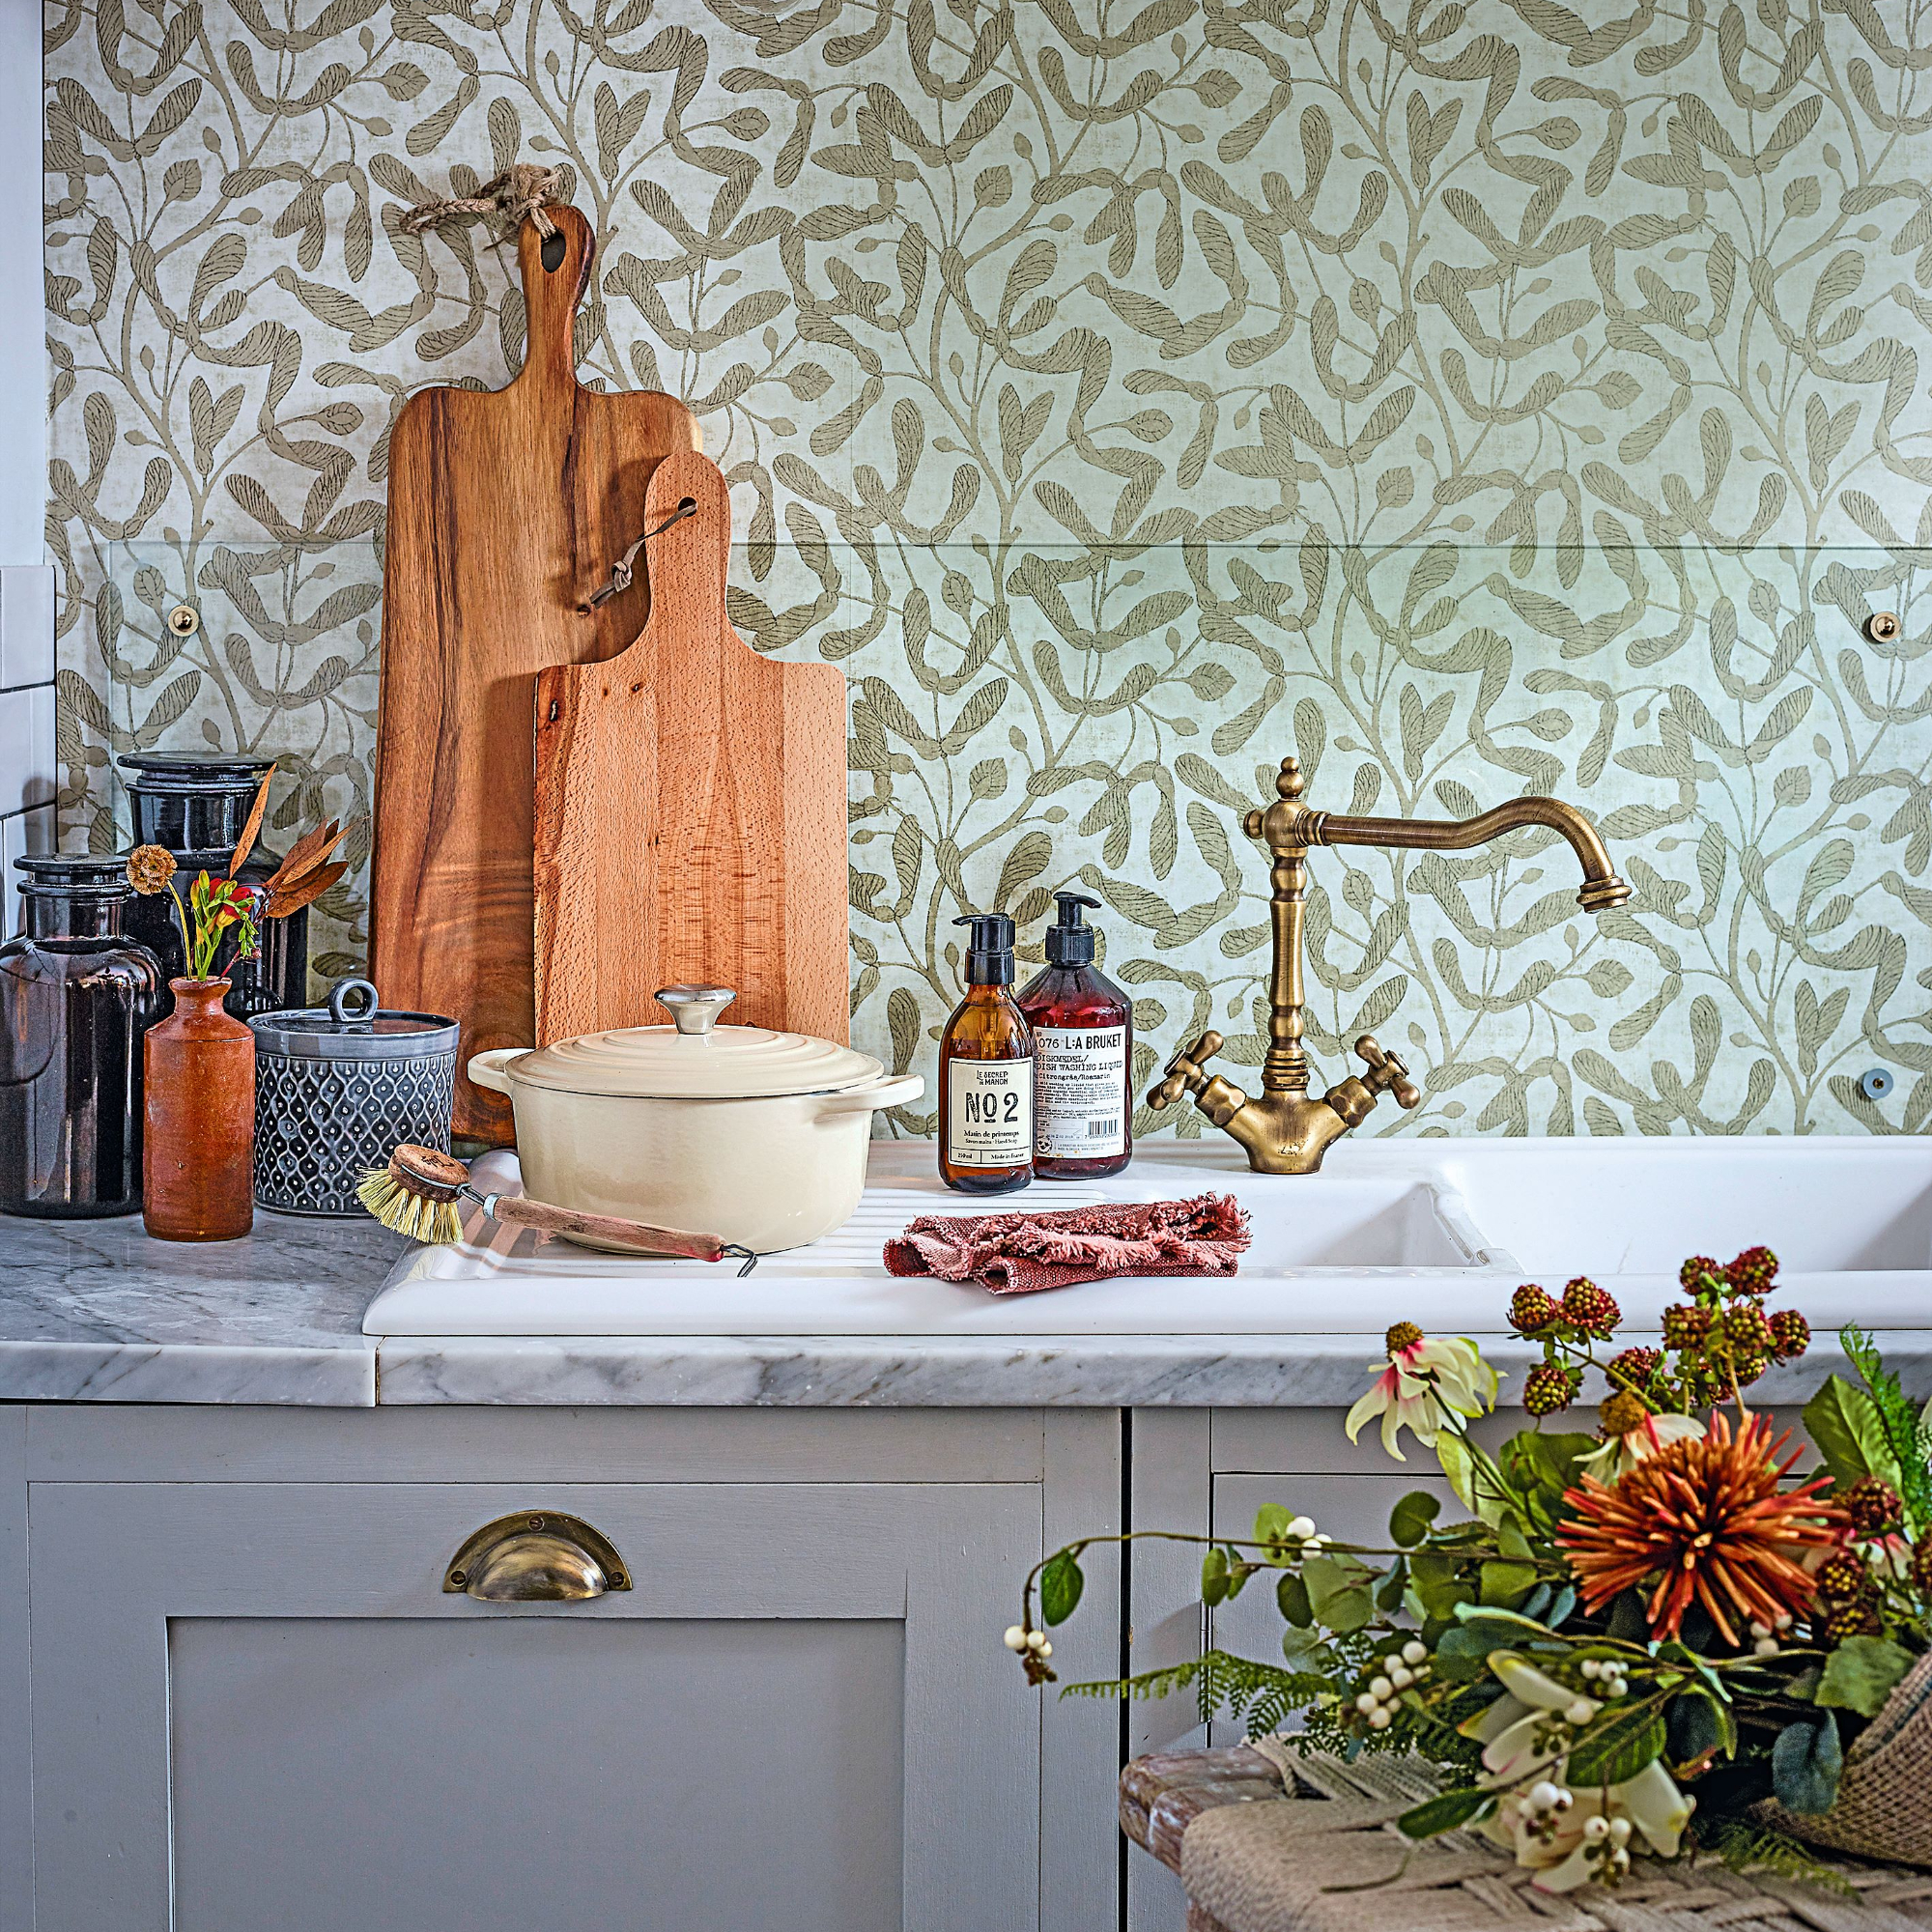 Kitchen sink and draining board in front of mistletoe wallpaper on a marble worktop with a stool decorated with flowers